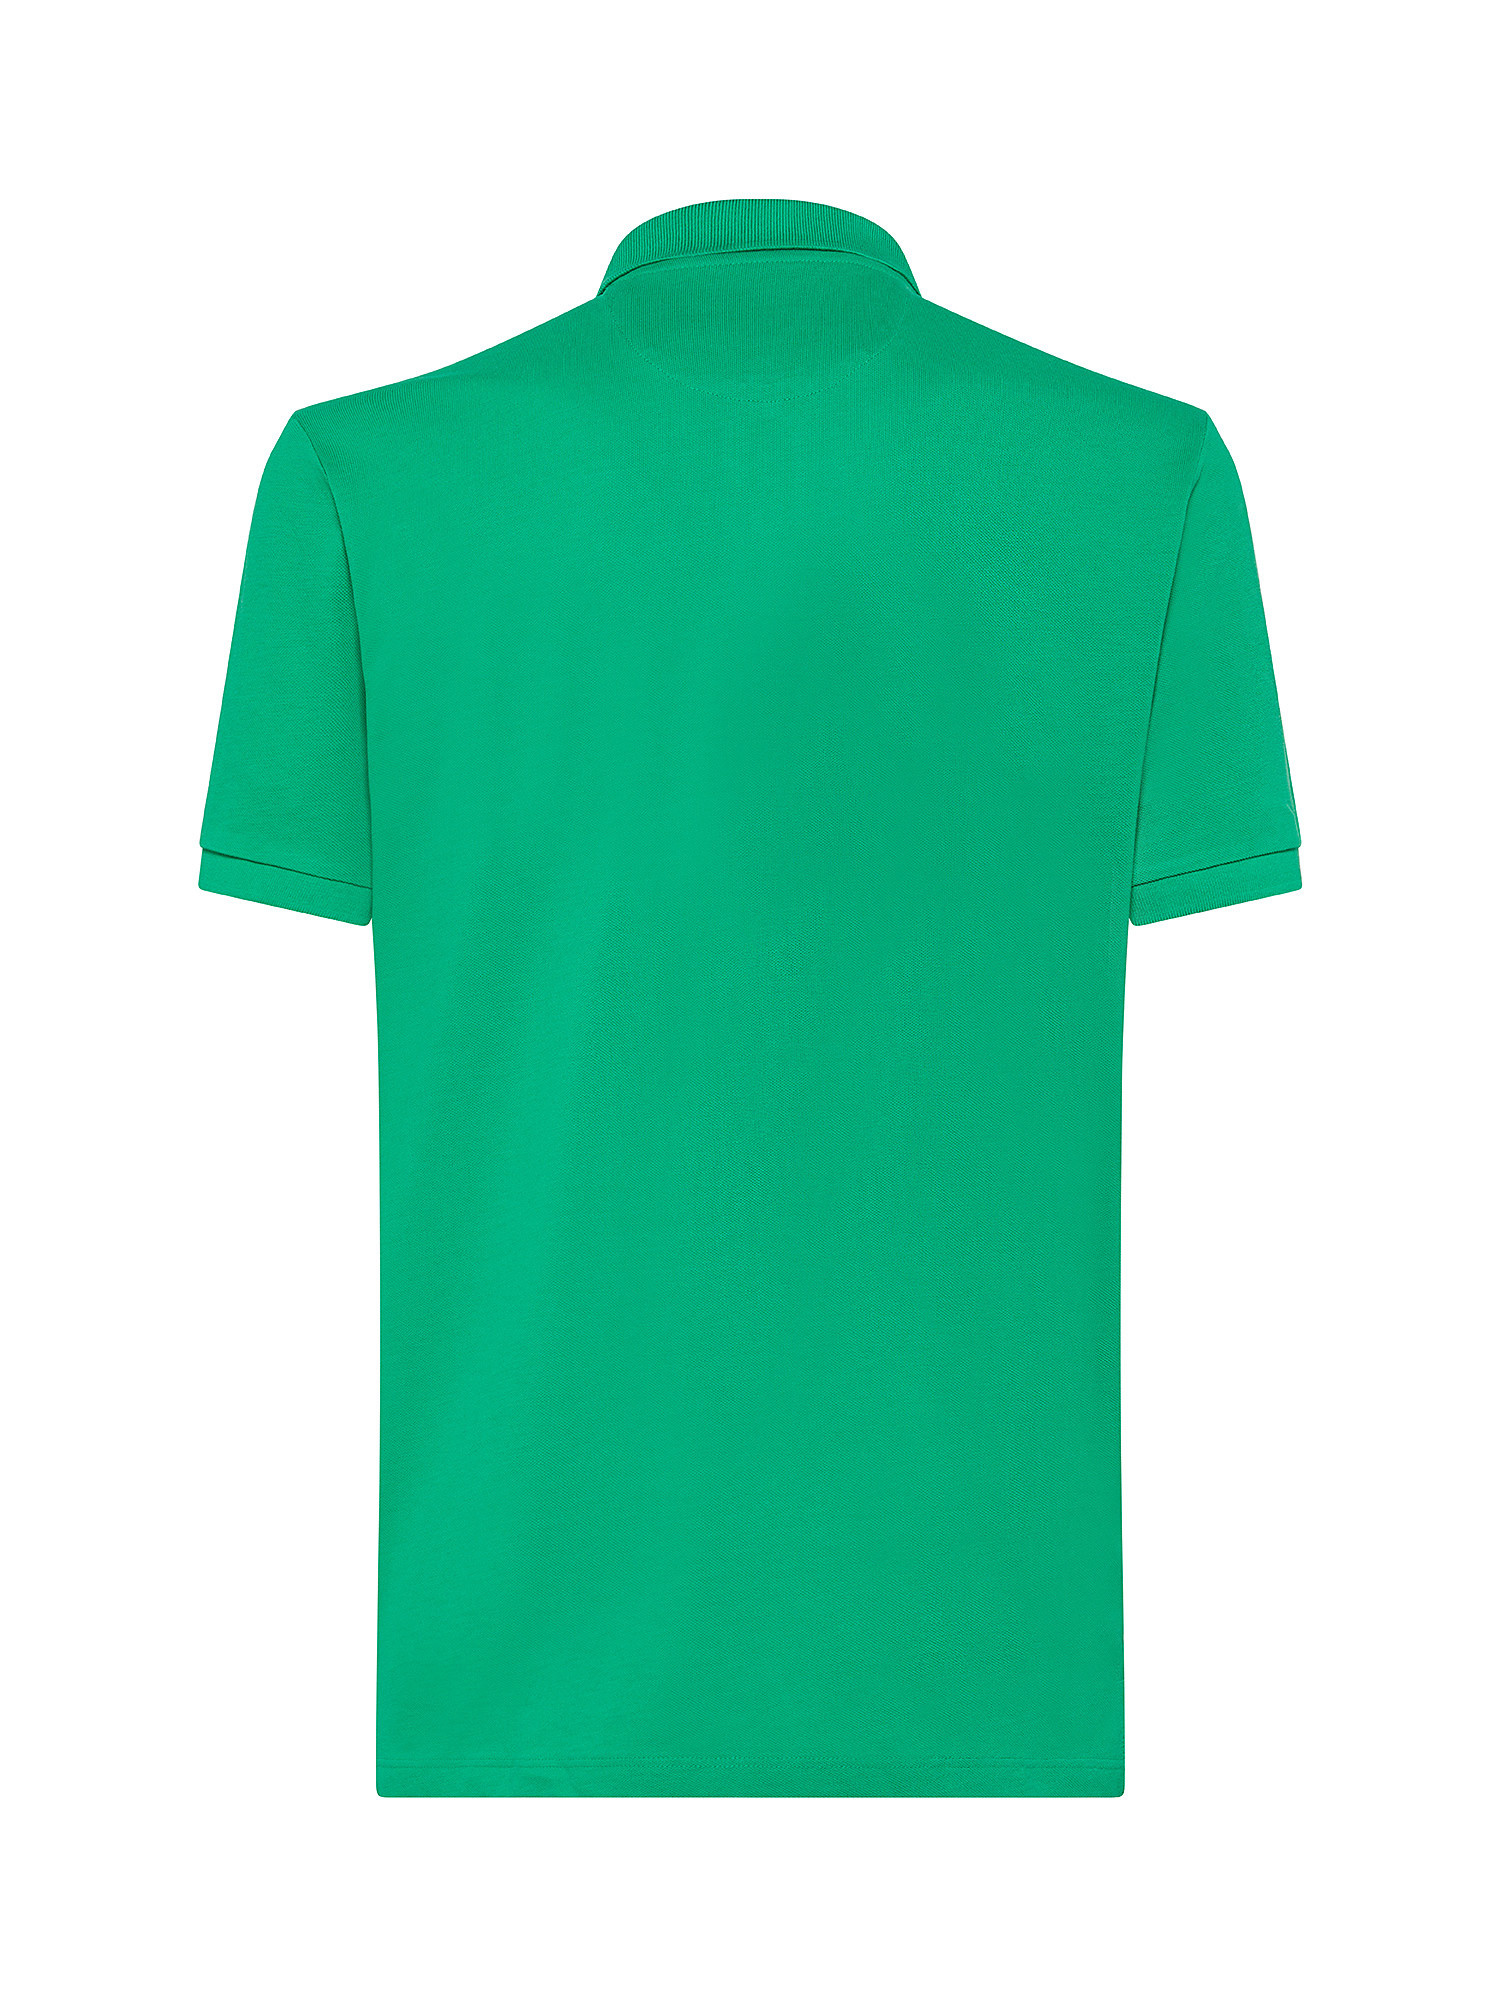 Luca D'Altieri - Polo in pure cotton, Green, large image number 1